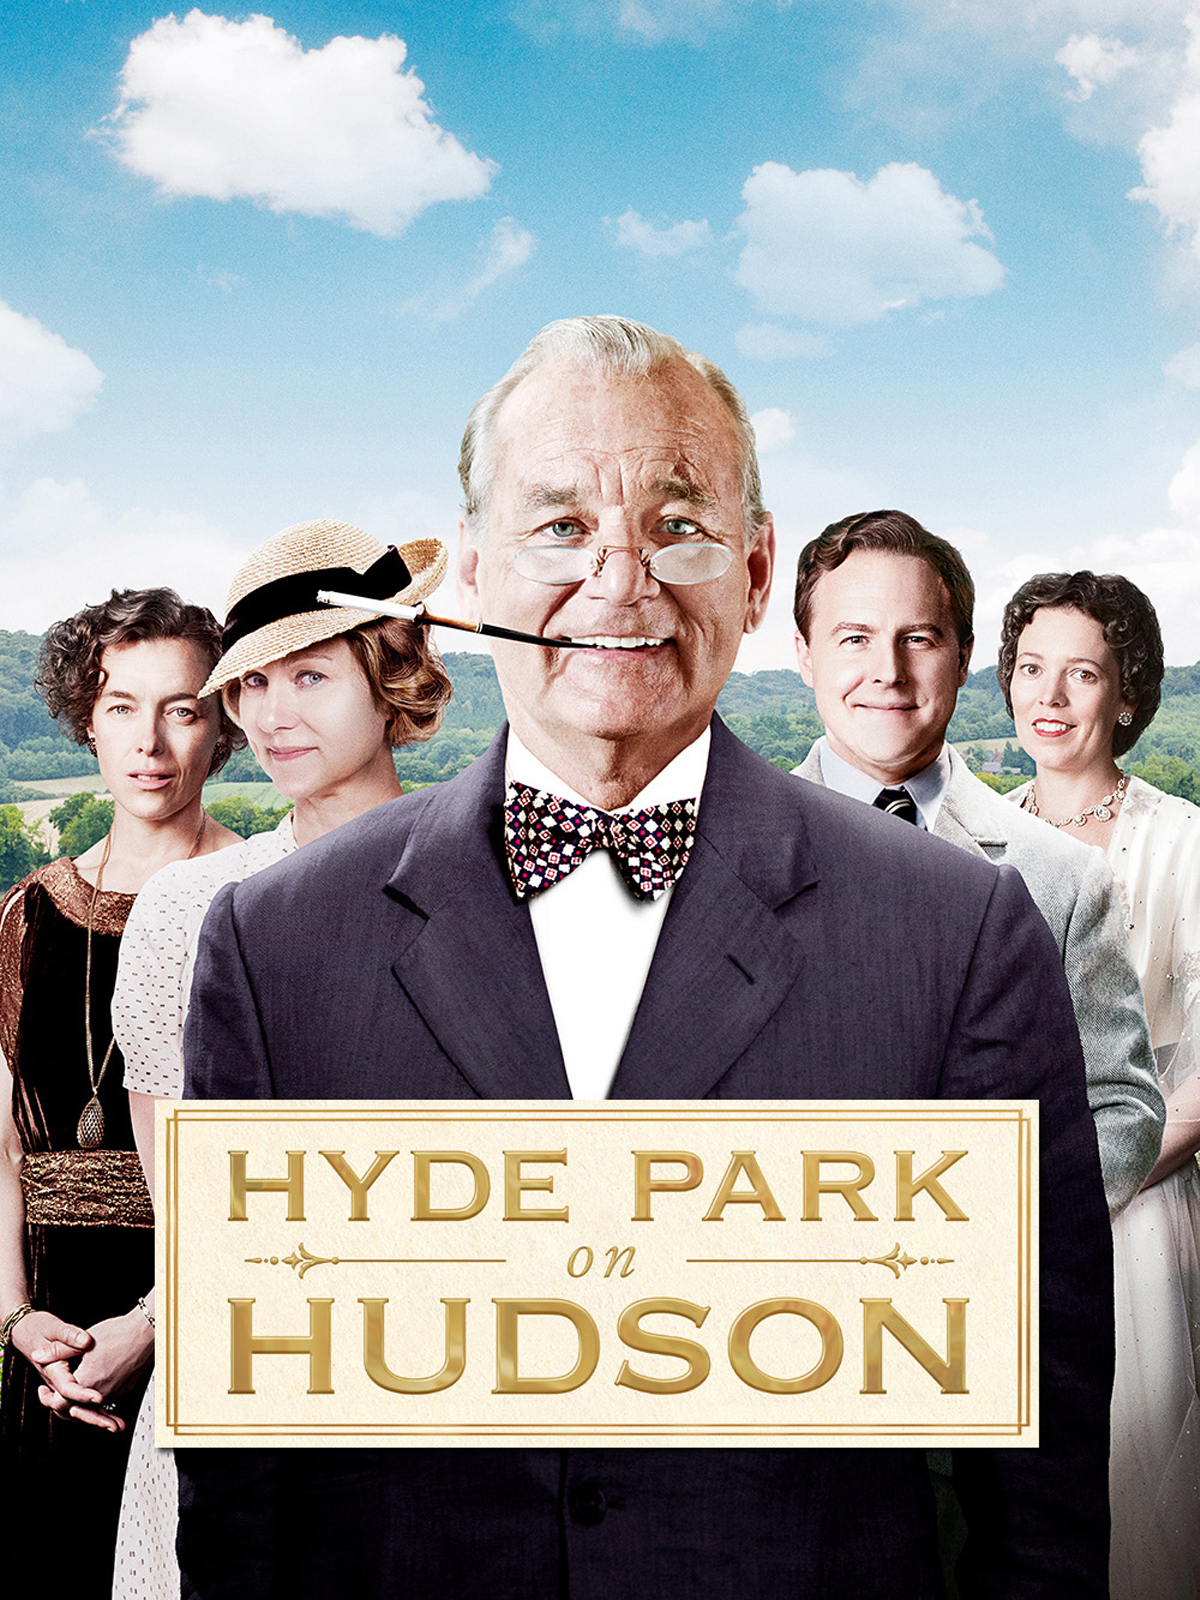 Tom Hanks standing in suit and bow tie with cigarette in cigarette holder and behind him is one man and three women. Words on bottom 'Hyde Park on Hudson'